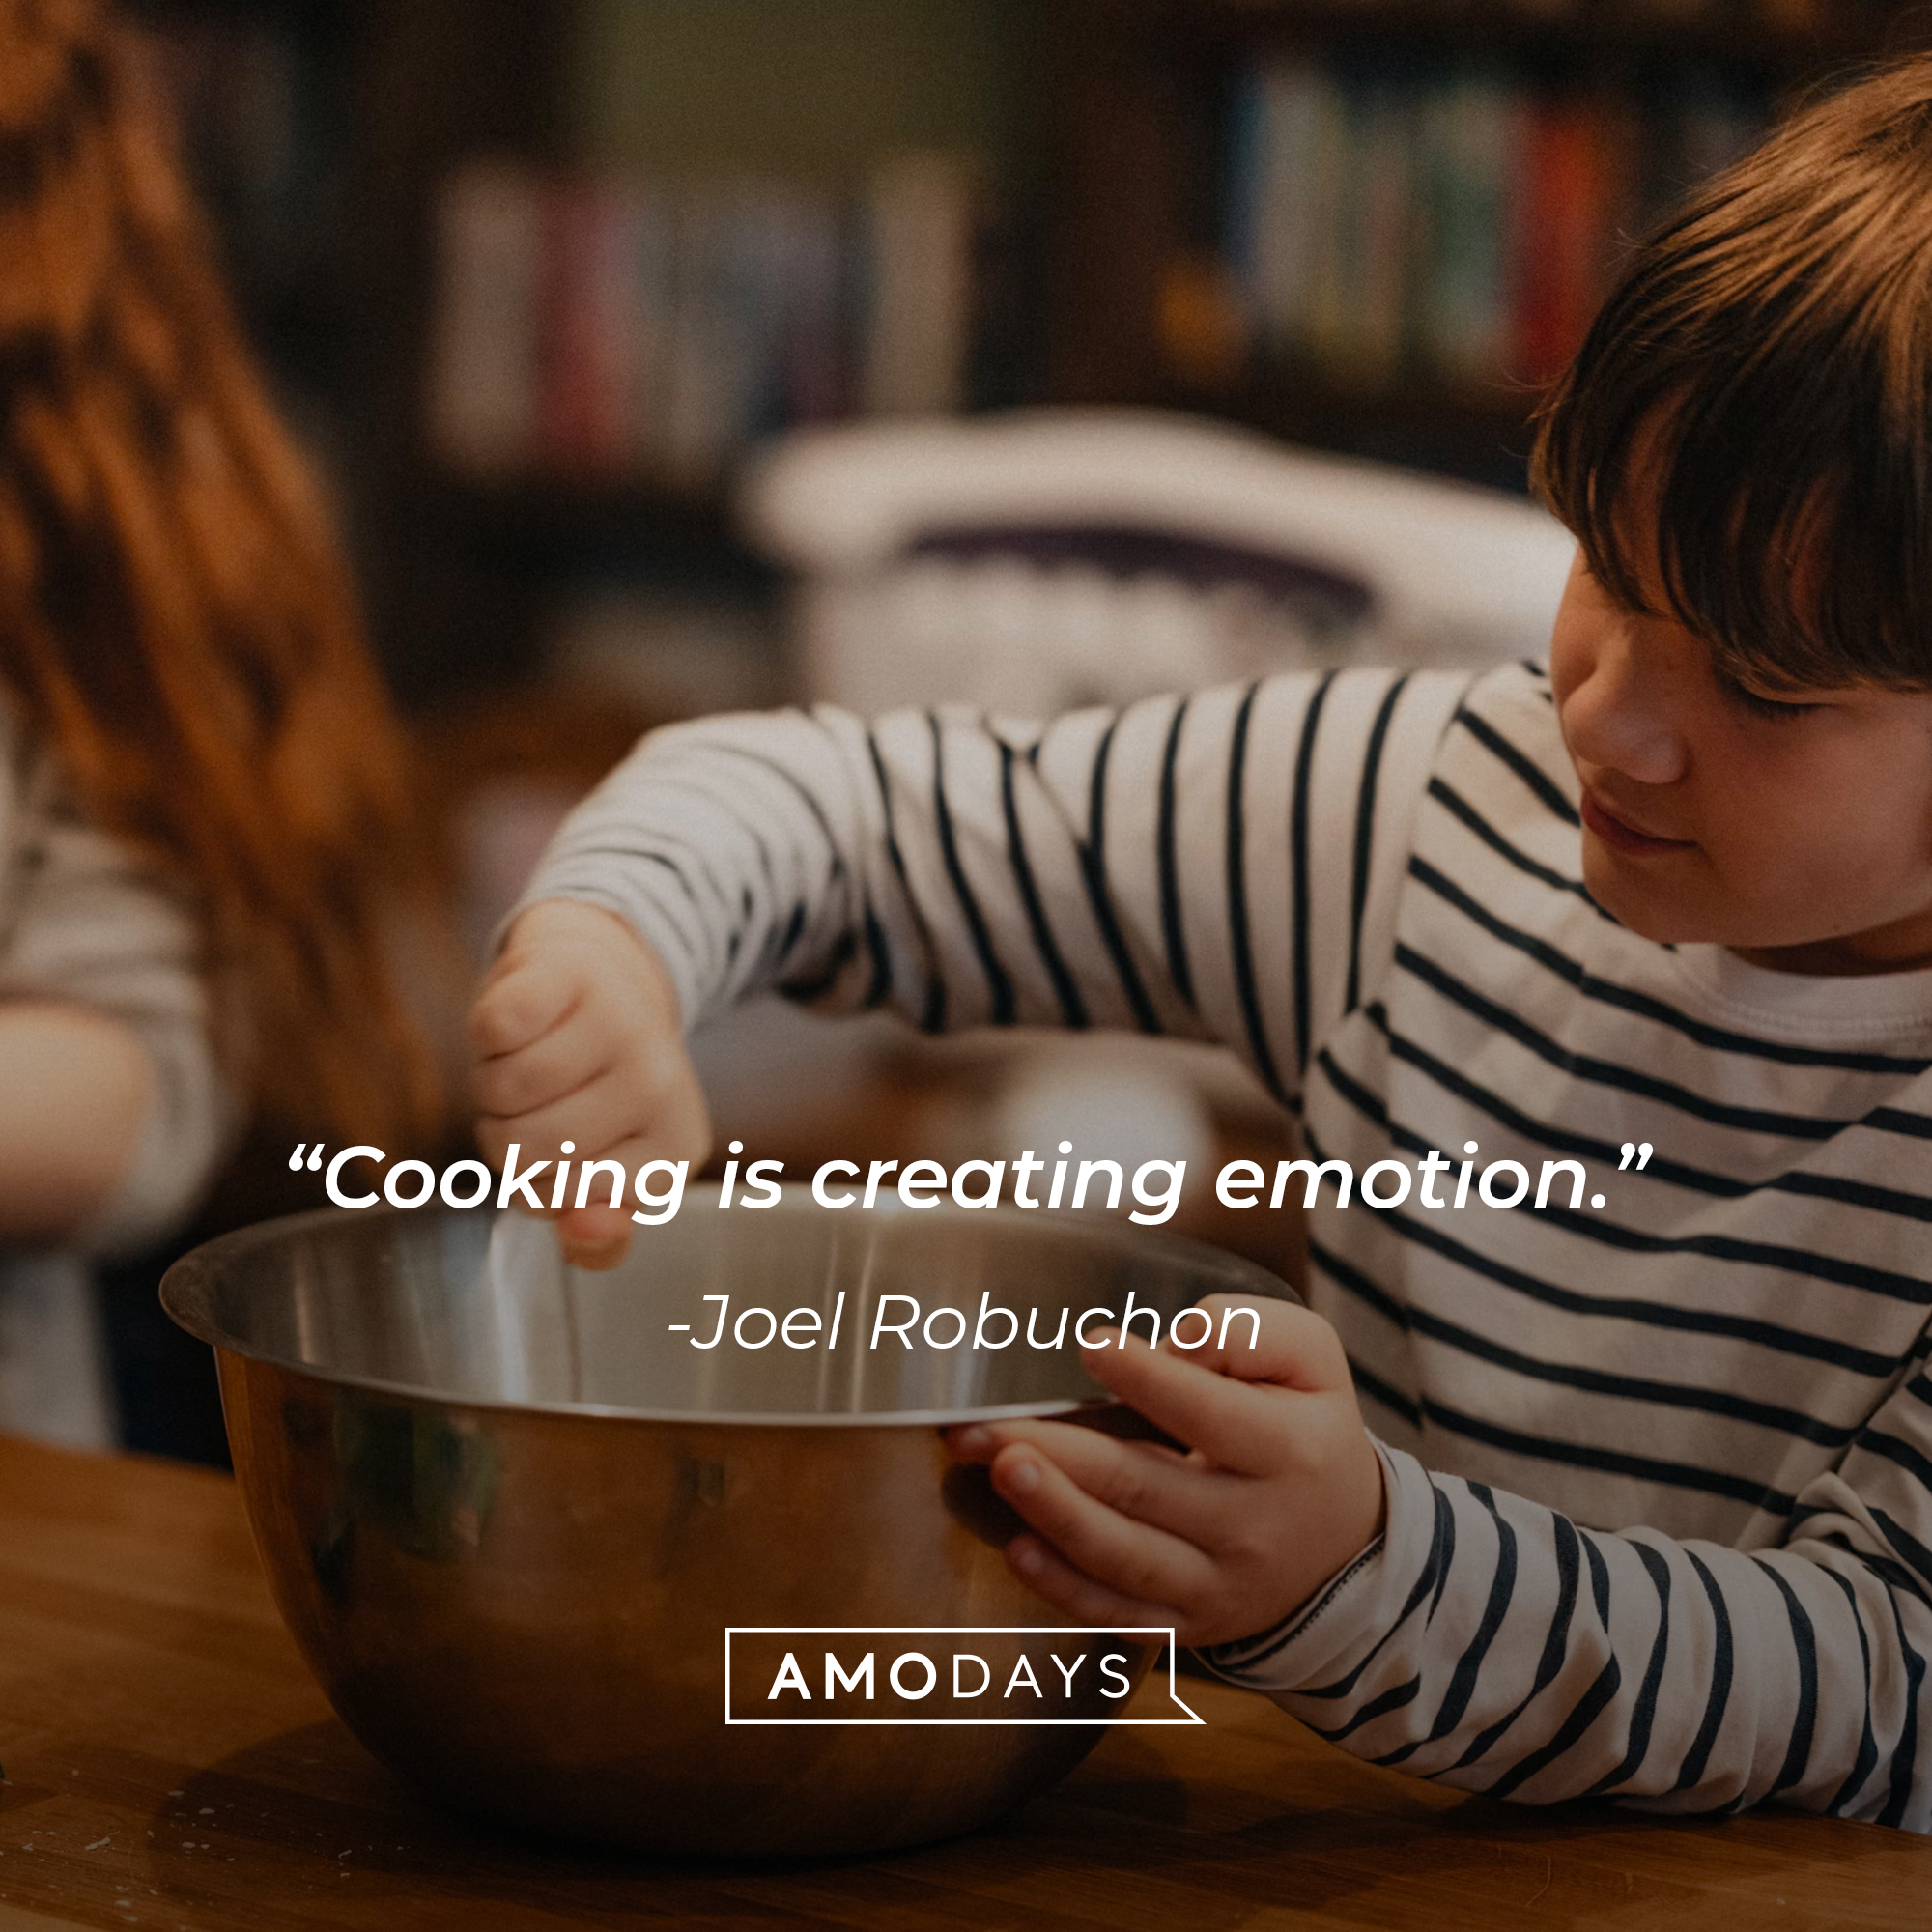 Joel Robuchon's quote: "Cooking is creating emotion." Source: Brainyquote